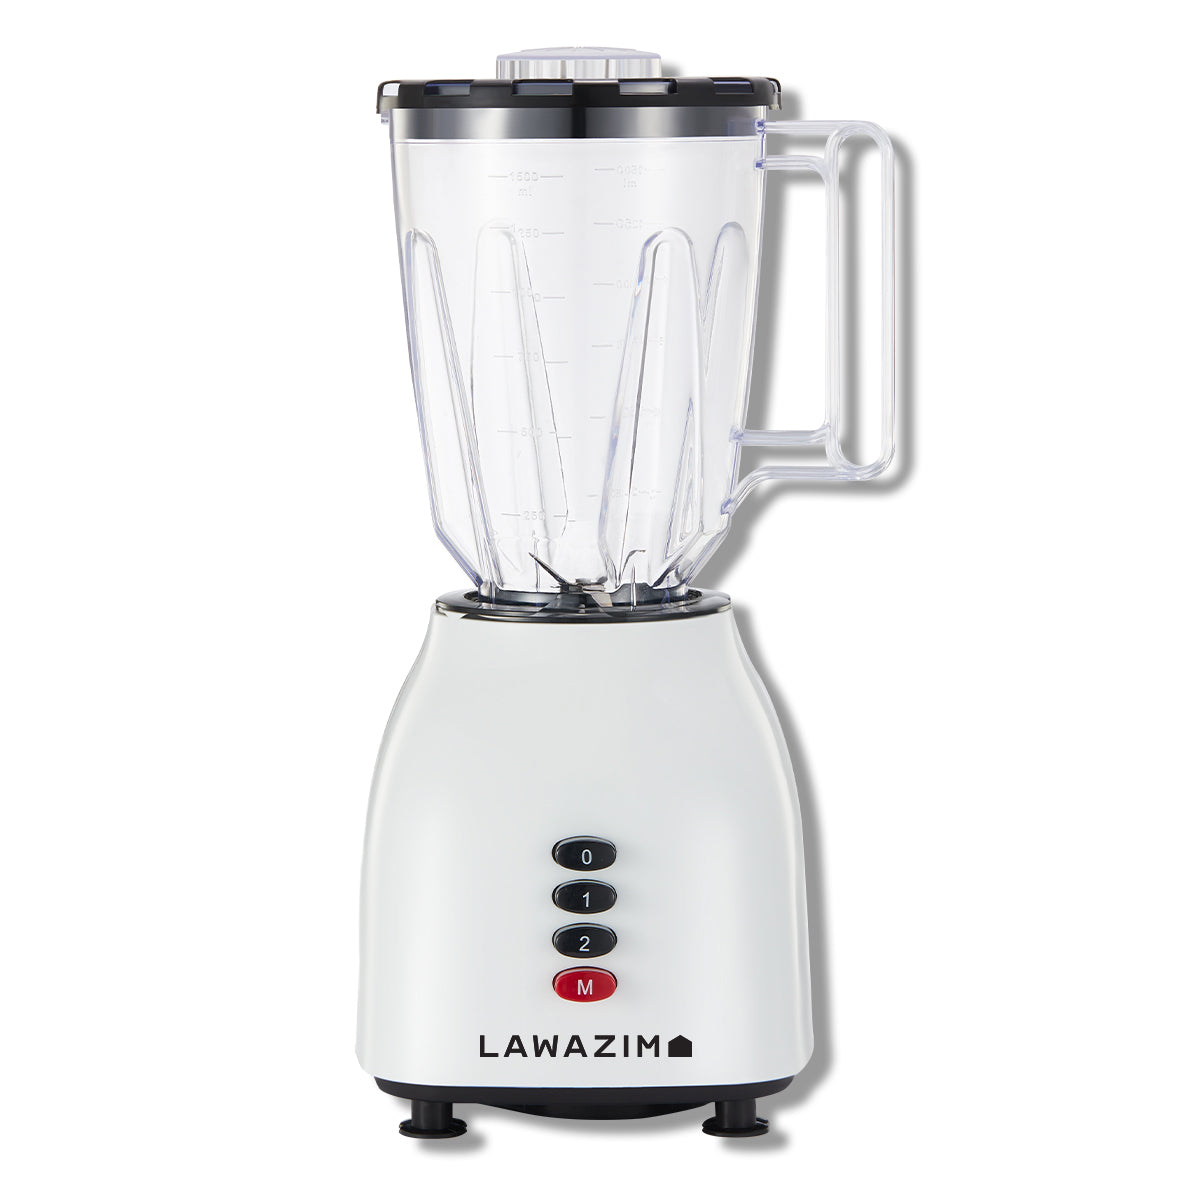 2-In-1 Electric Blender Button Control 1.5L 400W - White